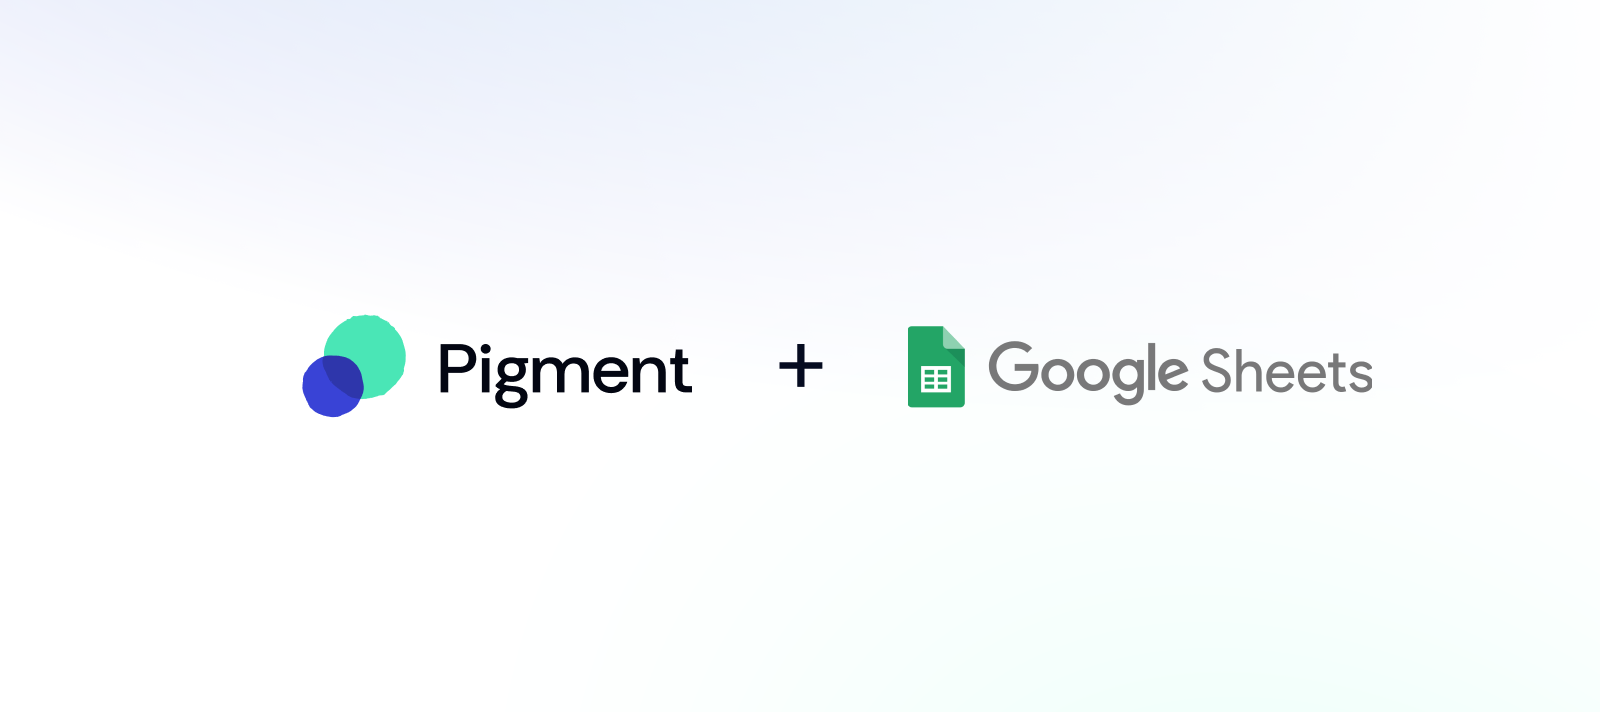 How to install Pigment's Connector for Google Sheets